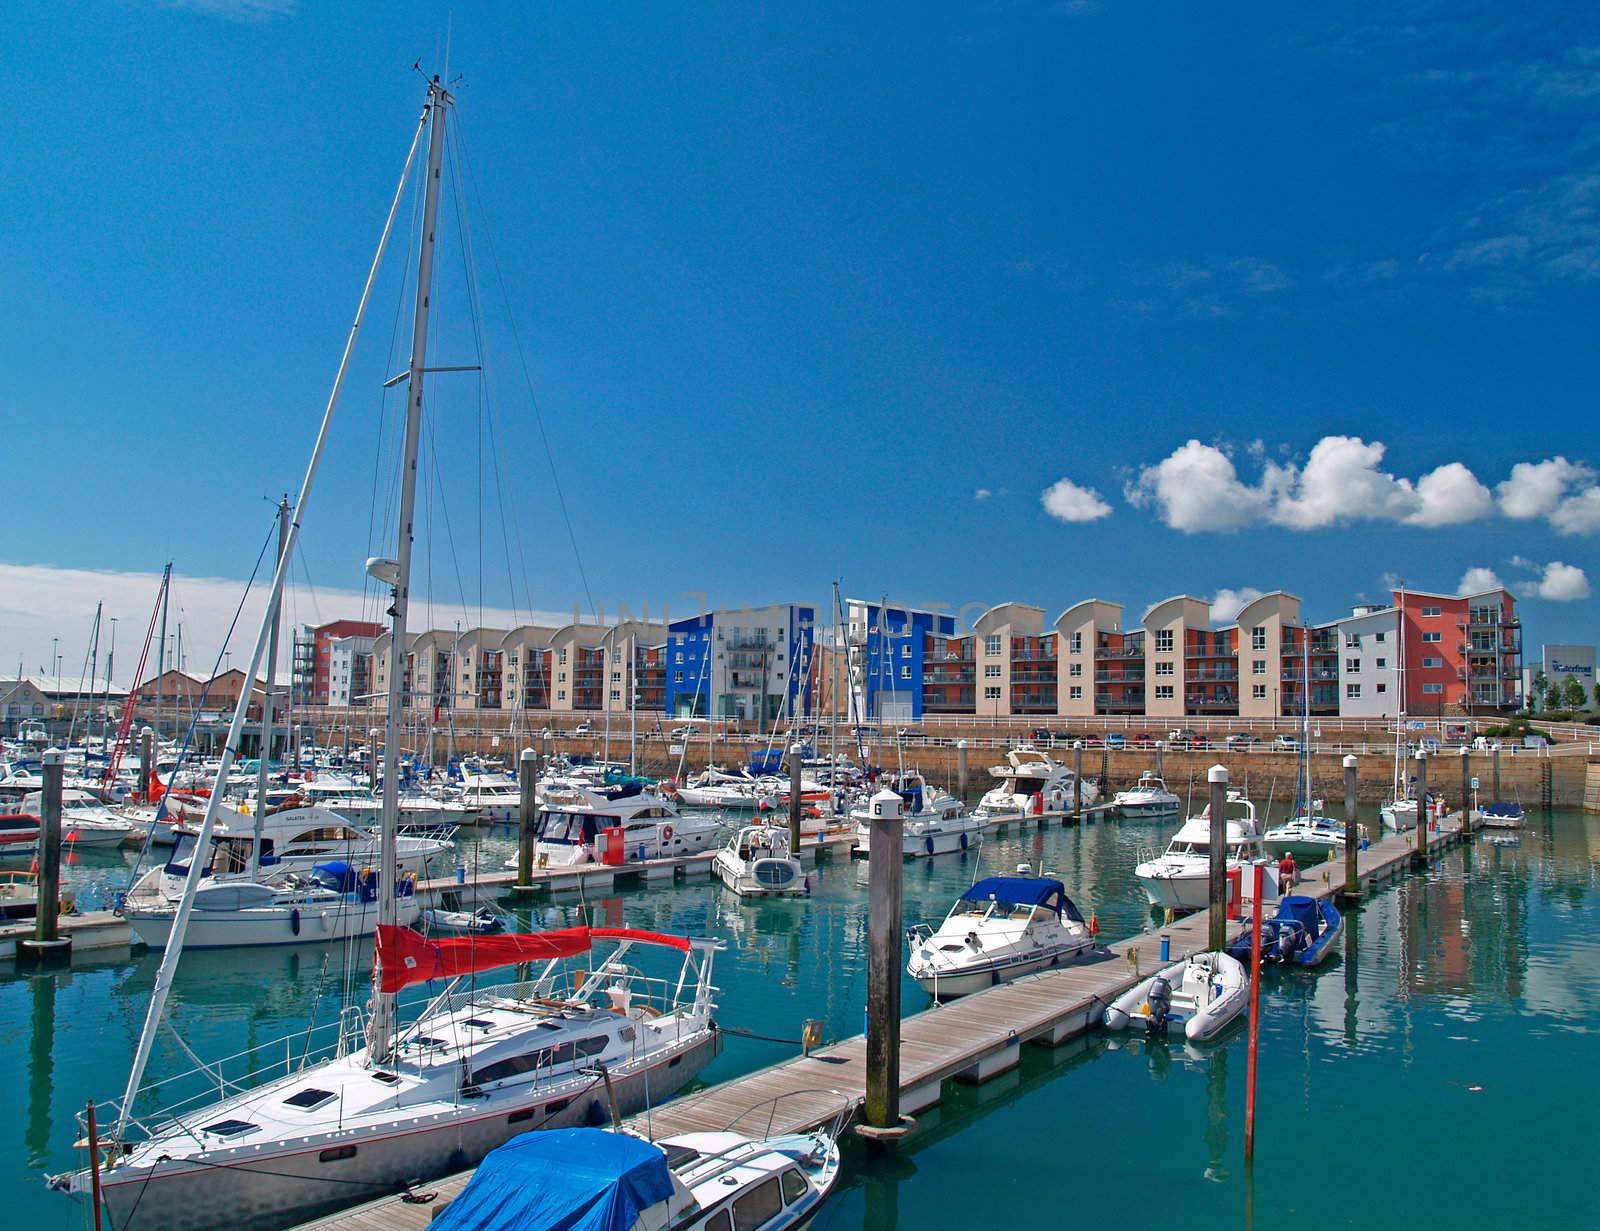 The yacht harbor of the Channel Island Jersey, UK